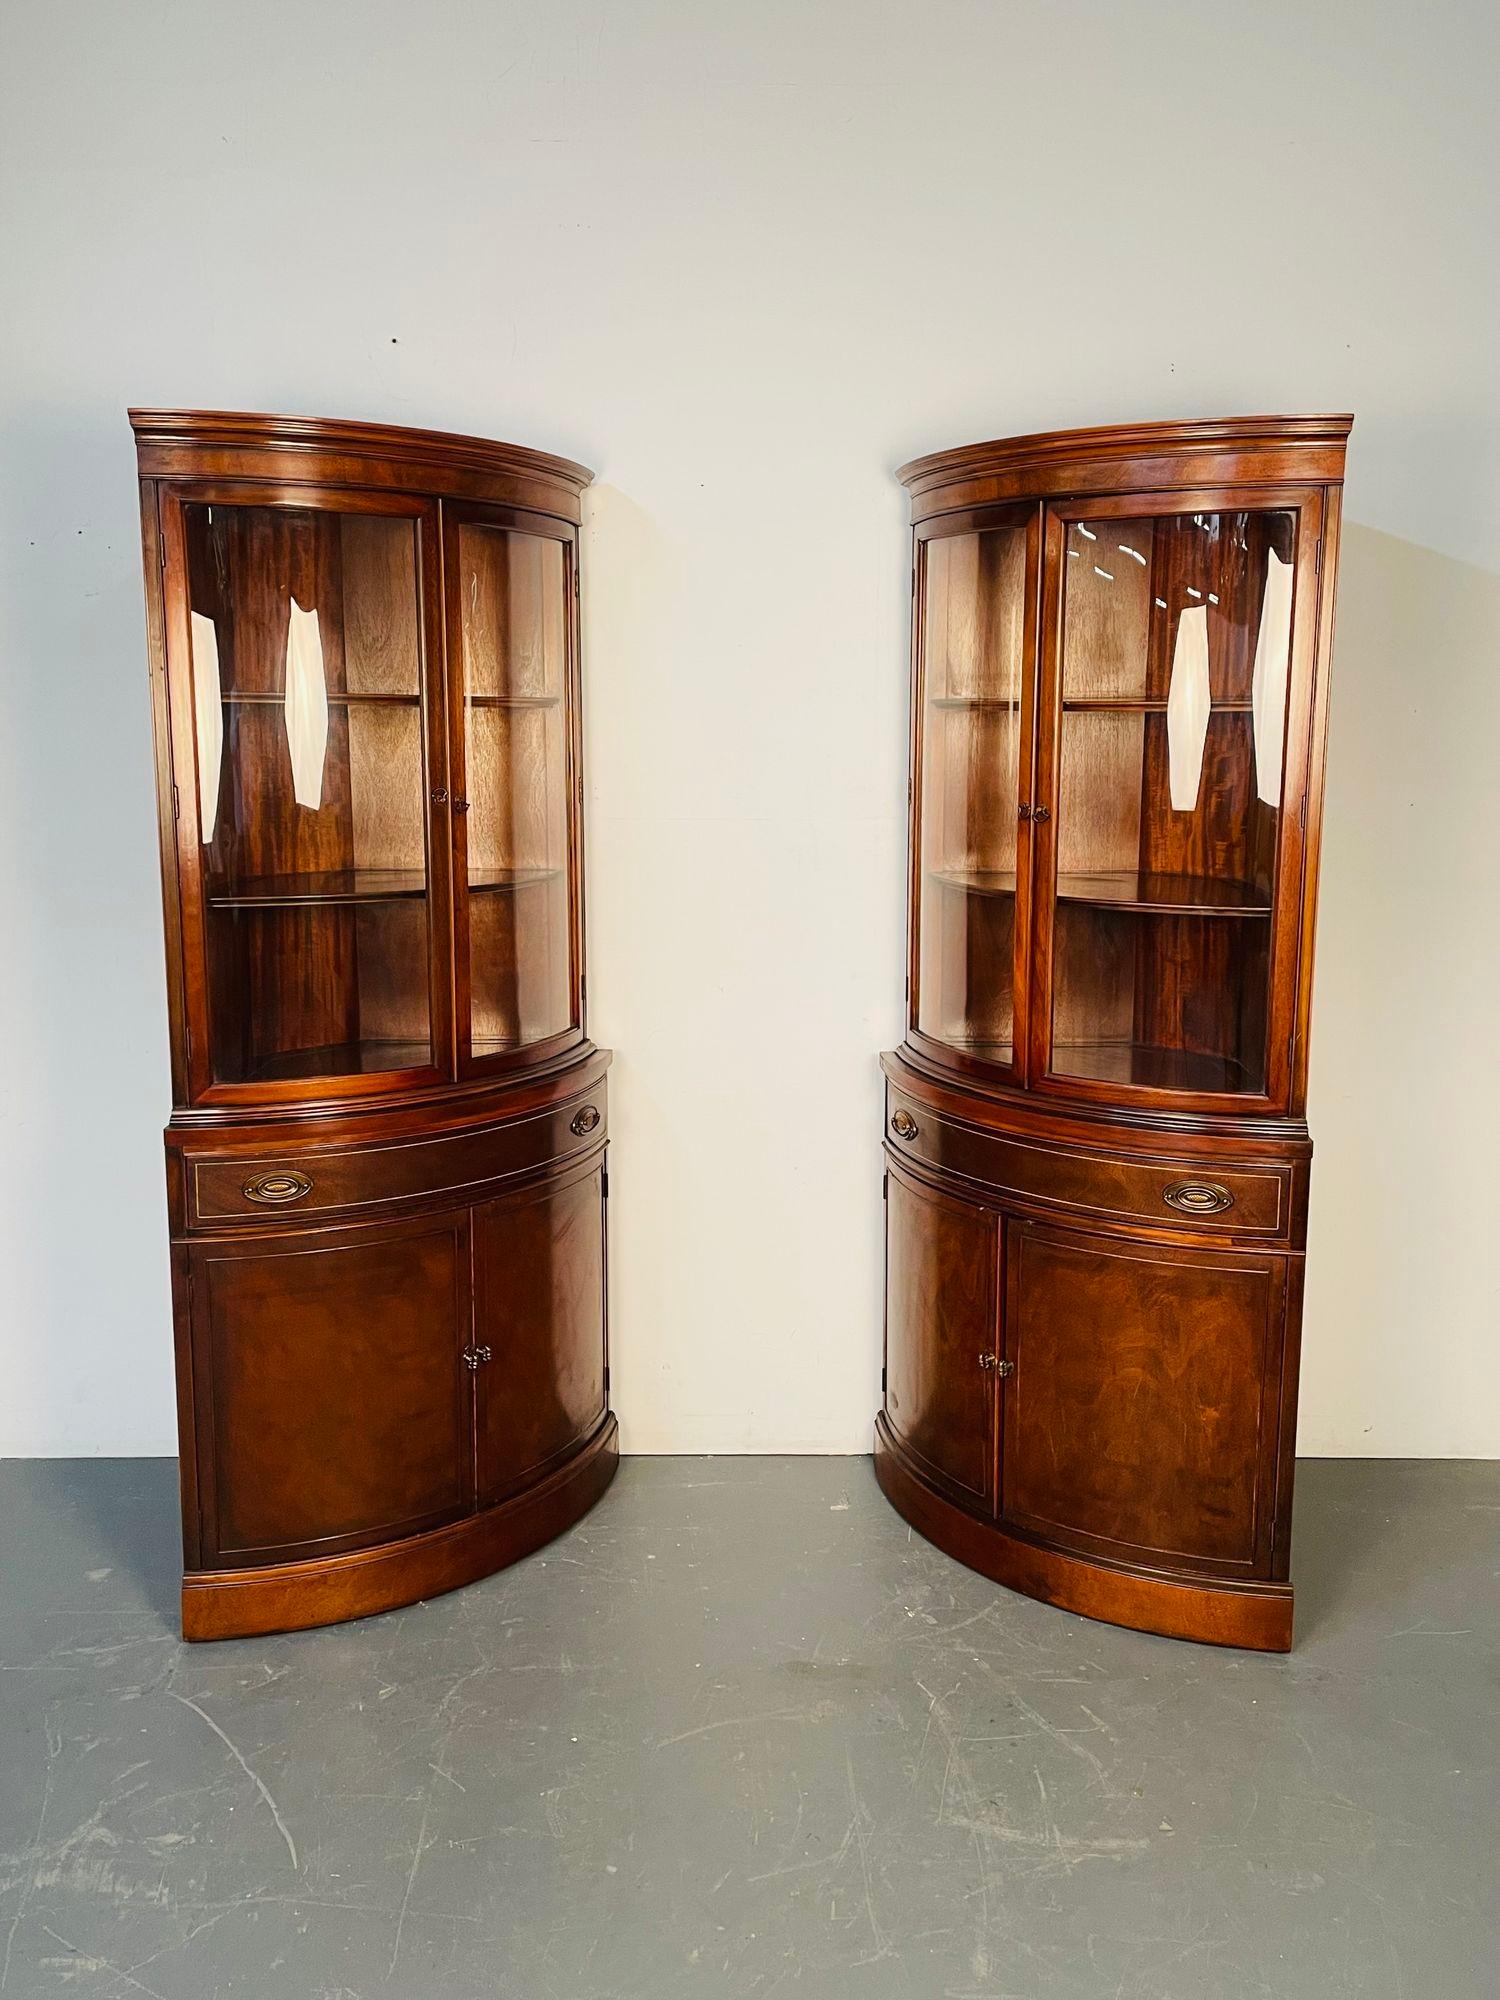 Pair of Mahogany Demi Lune Corner Cabinets, Bookcases / Vitrines, Circa 1940

Each having a deep bowed front with double bowed glass doors over a single drawer and two doors leading to a fitted shelved interior. Each in a nice fine flame